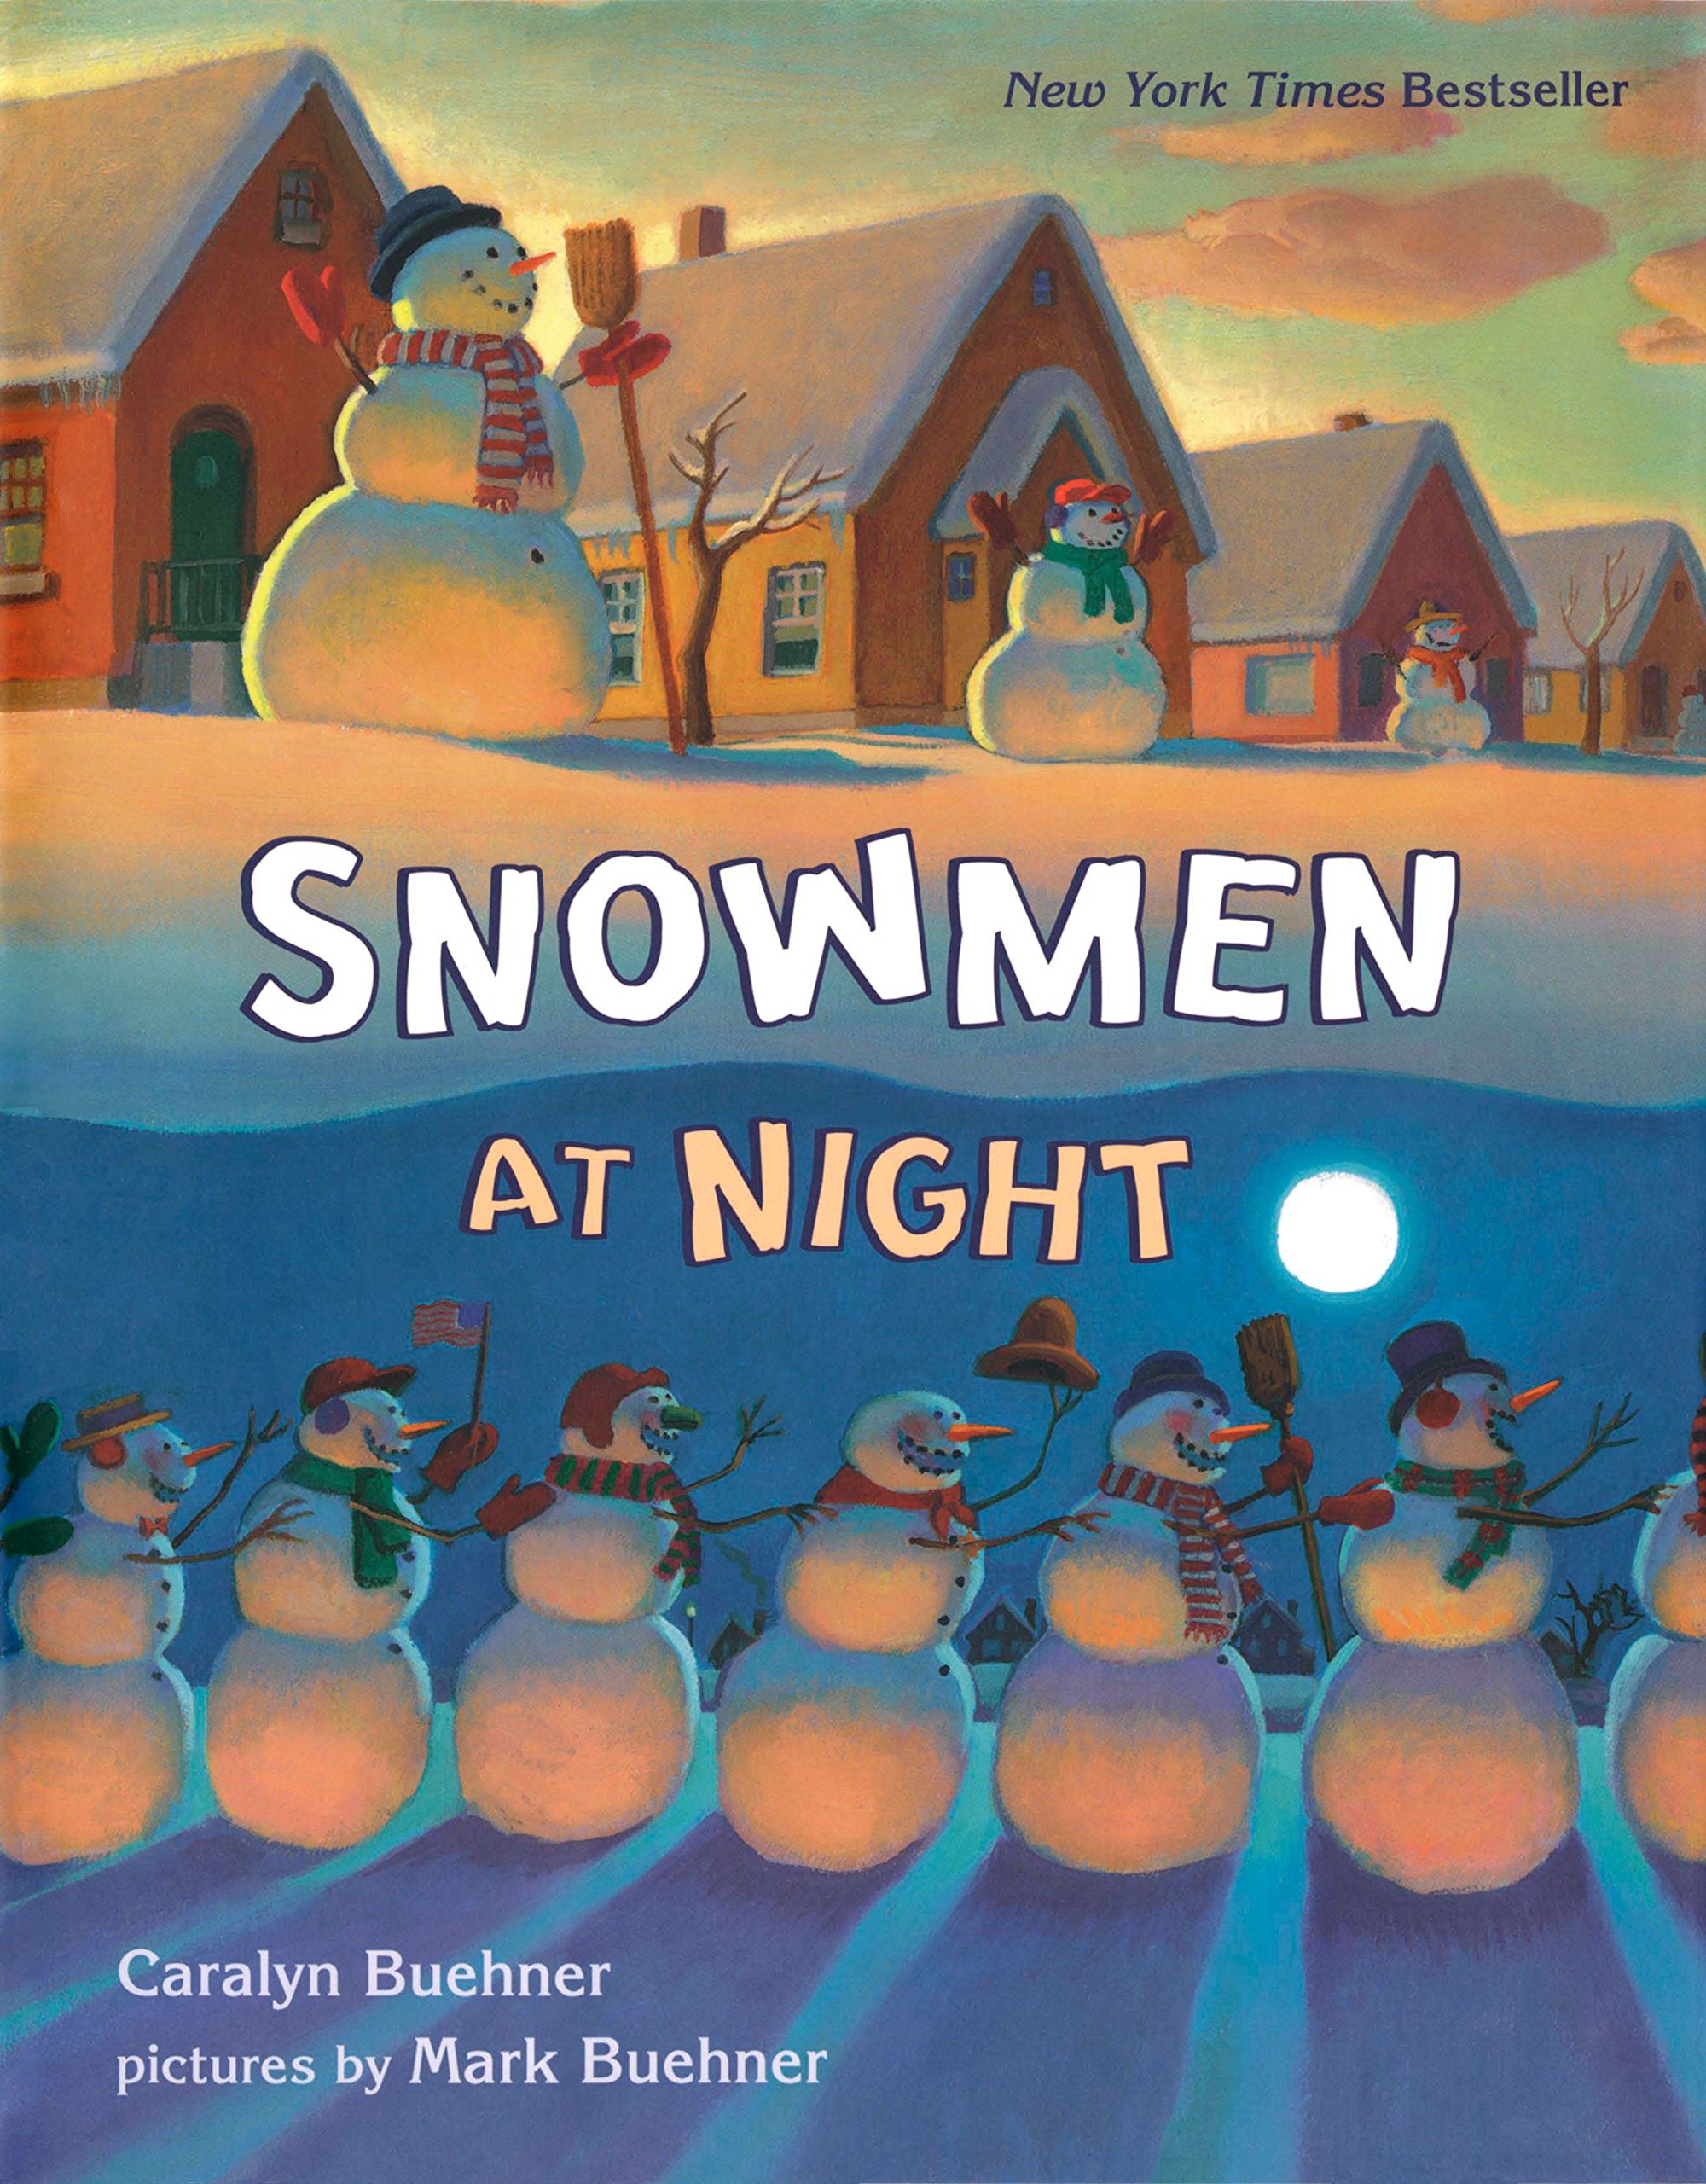 speech and language teaching concepts for Snowmen at Night in speech therapy​ ​